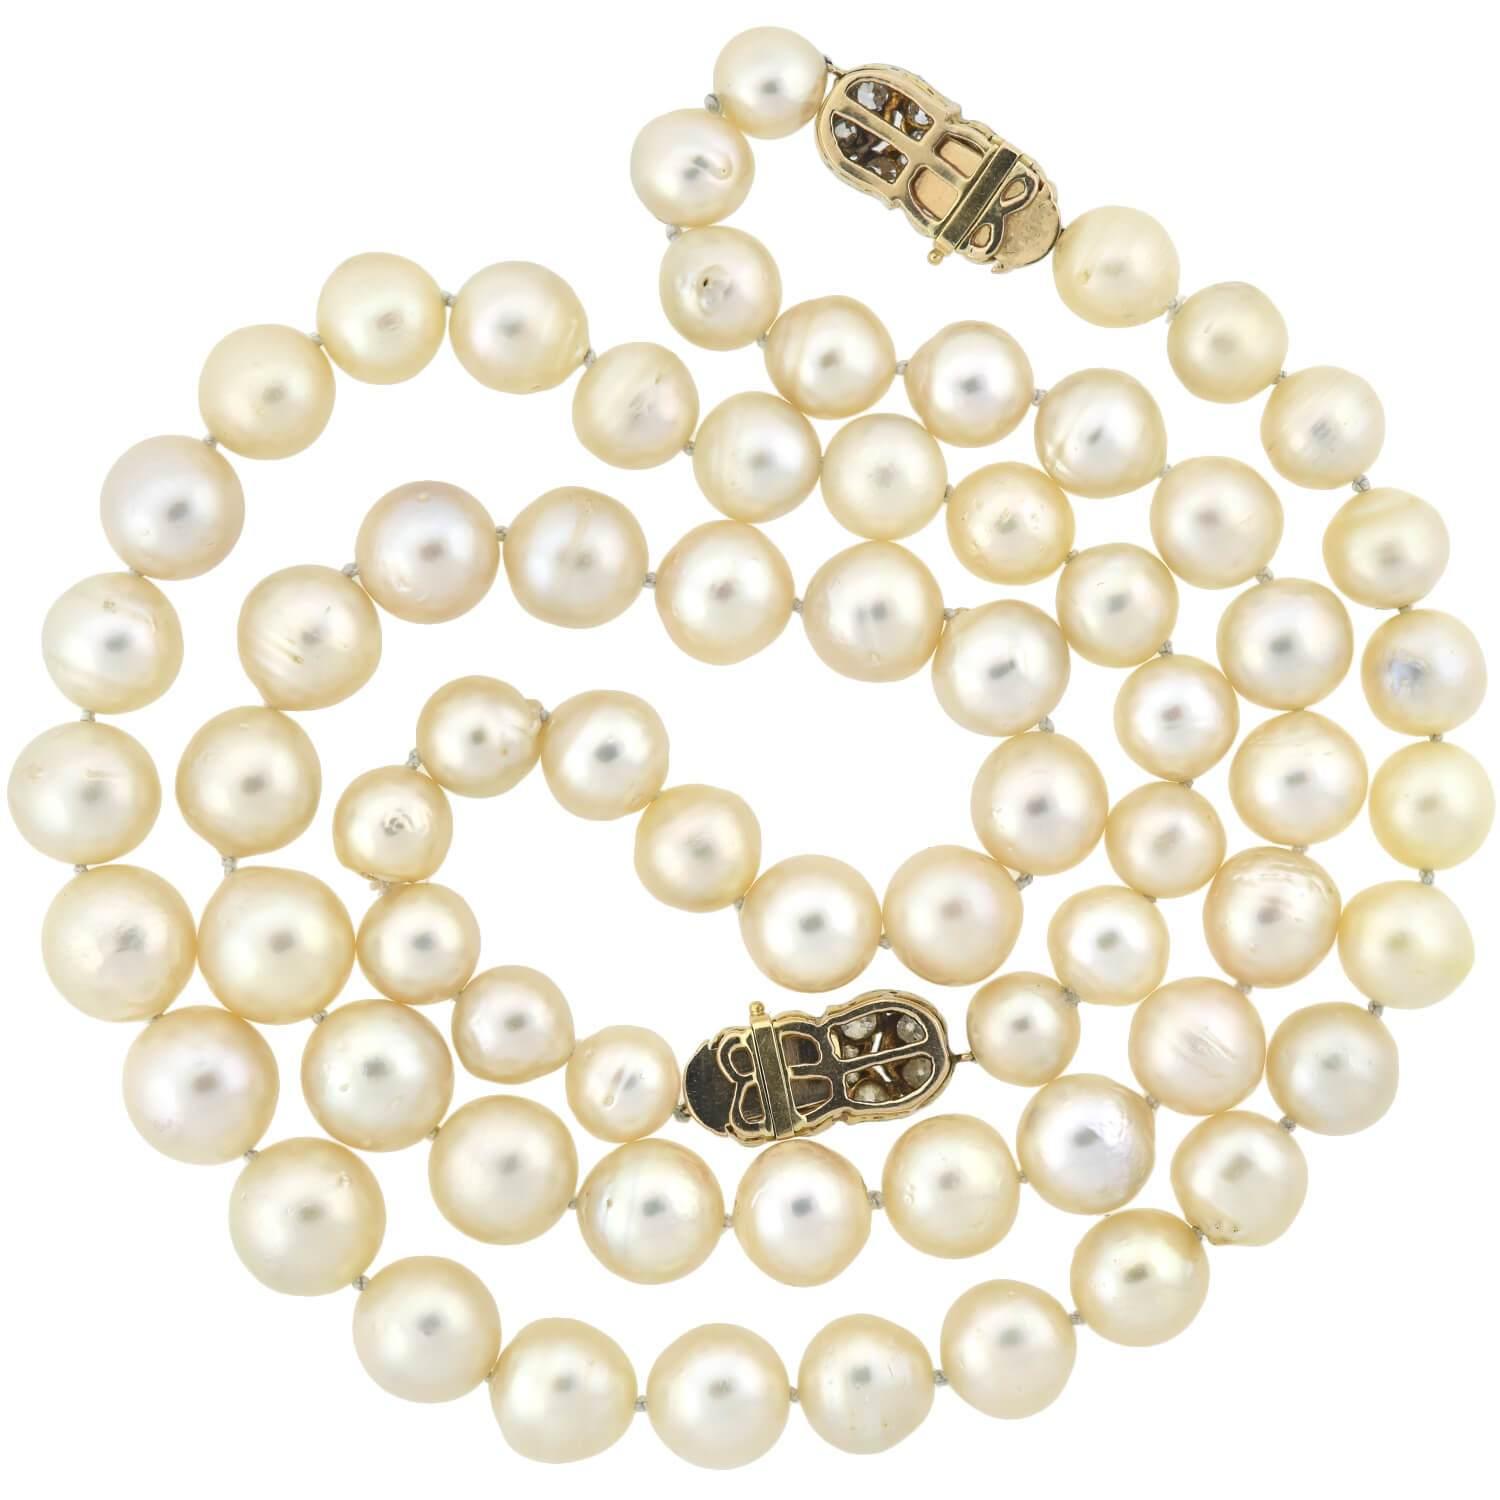 Women's Edwardian South Sea Pearl Convertible Necklace with Diamond Clasps